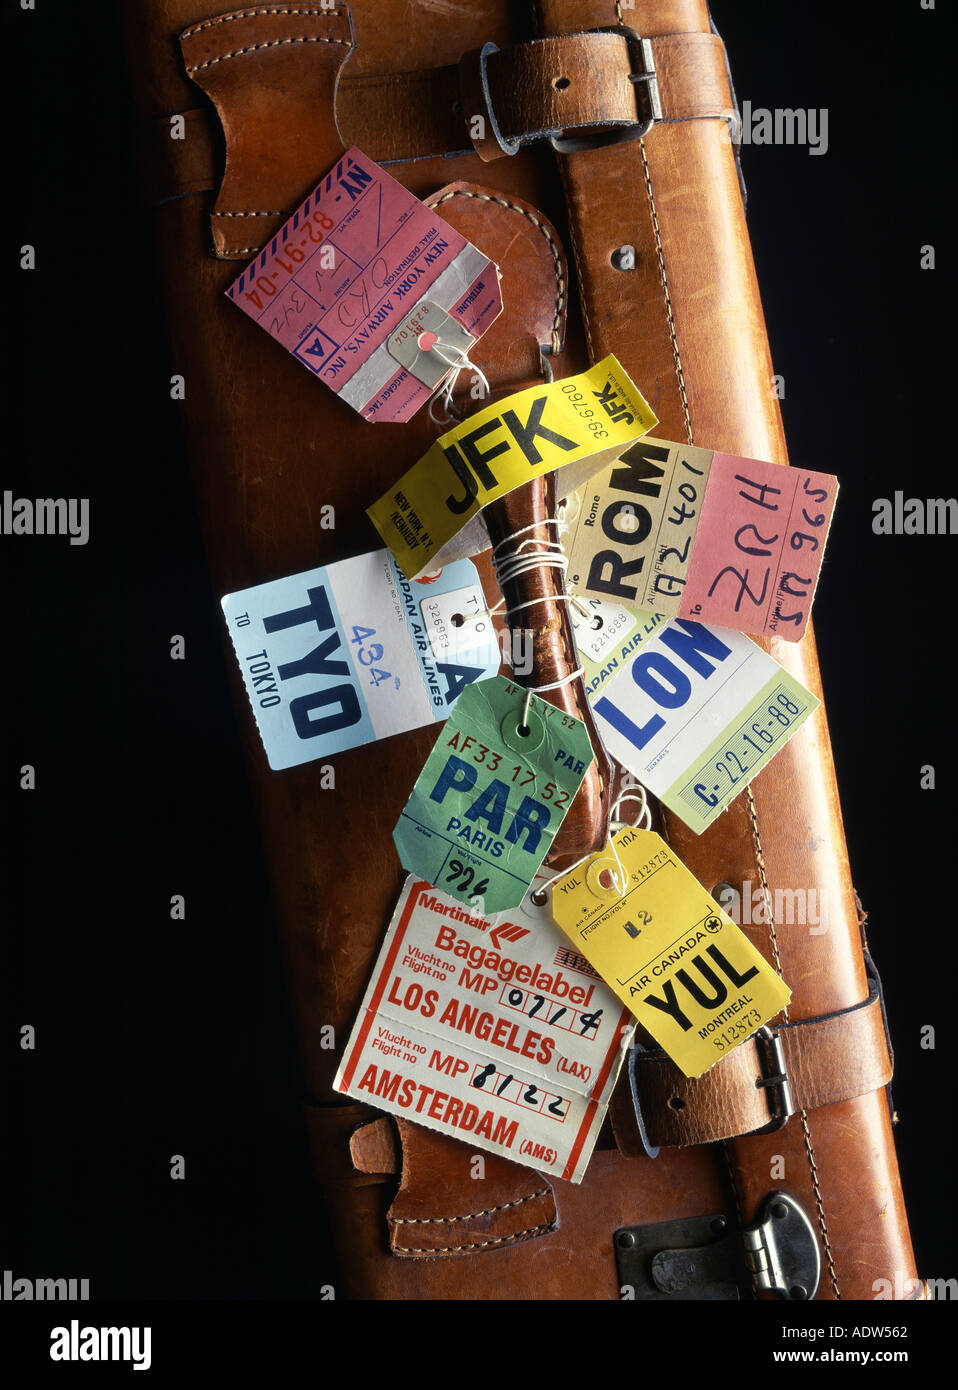 AIRLINE LUGGAGE TABS AROUND THE HANDLE OF A BROWN LEATHER SUITCASE Stock Photo